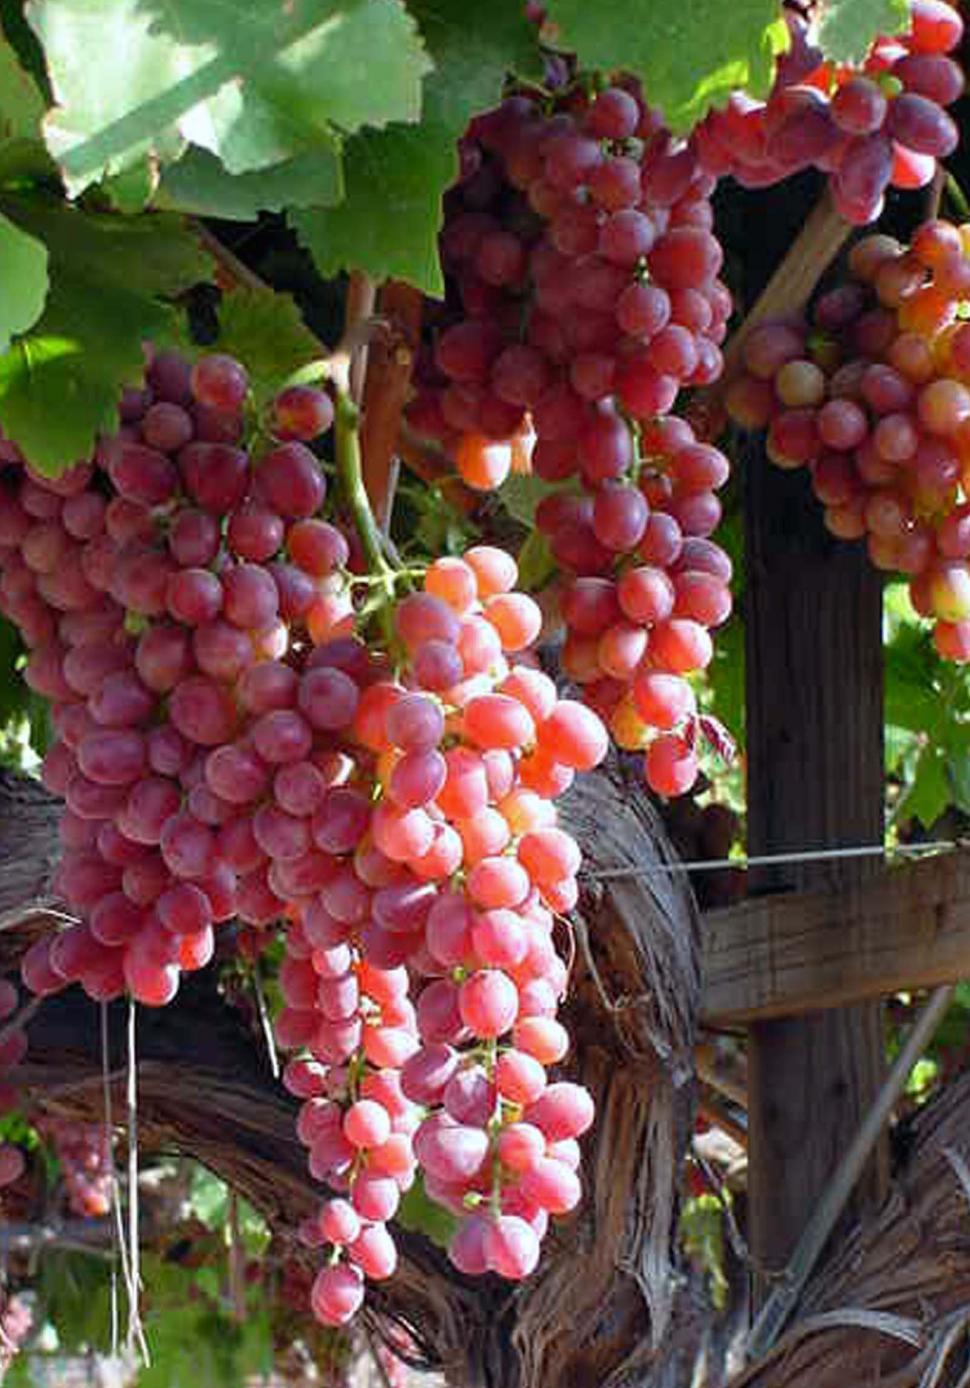 Free Image of Grapes 